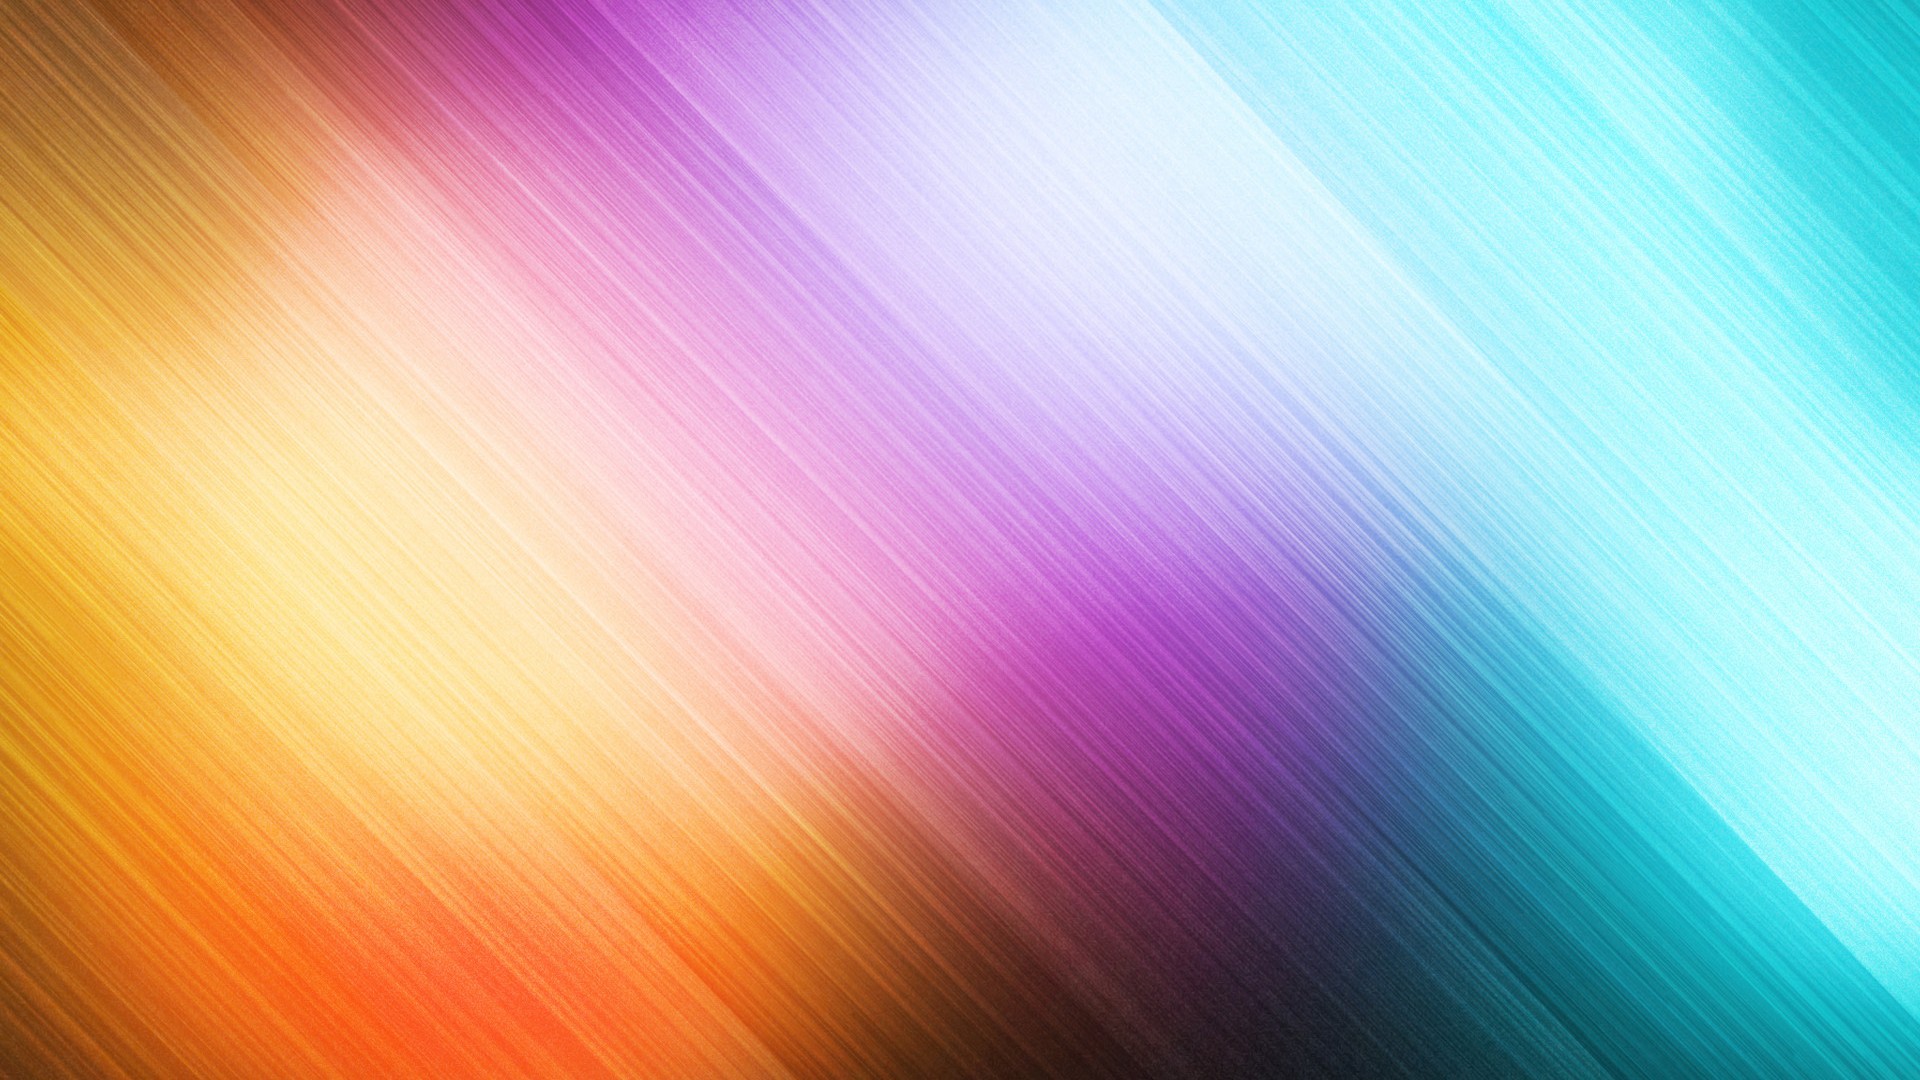 Wallpapers Computer Light Colorful With high-resolution 1920X1080 pixel. You can use this wallpaper for your Desktop Computer Backgrounds, Mac Wallpapers, Android Lock screen or iPhone Screensavers and another smartphone device